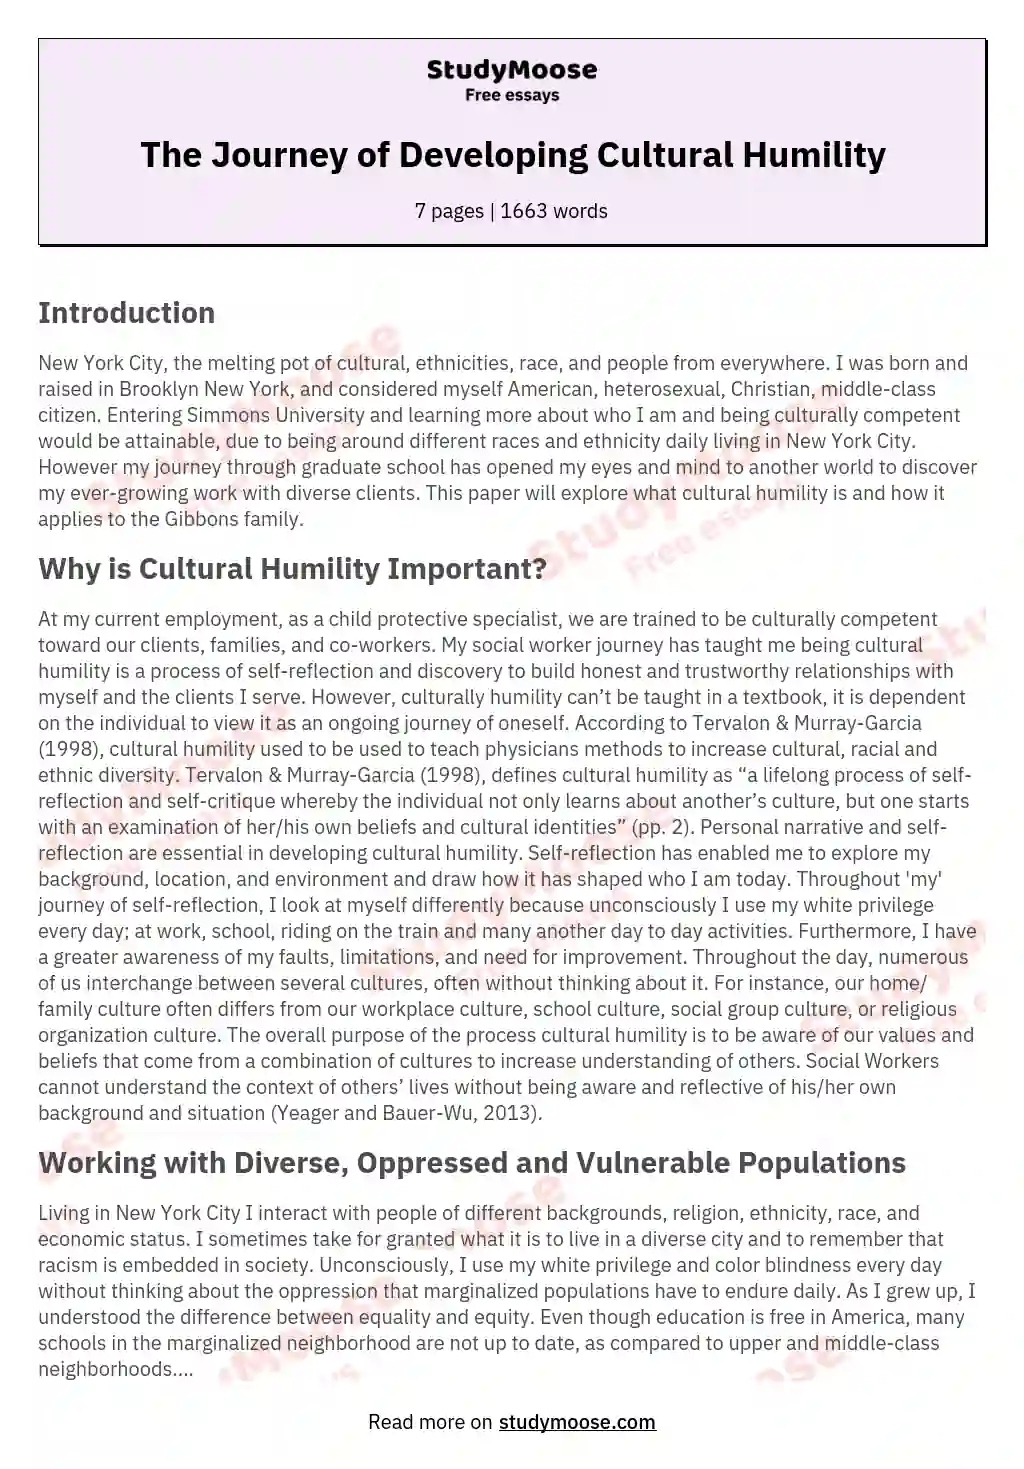 The Journey of Developing Cultural Humility essay